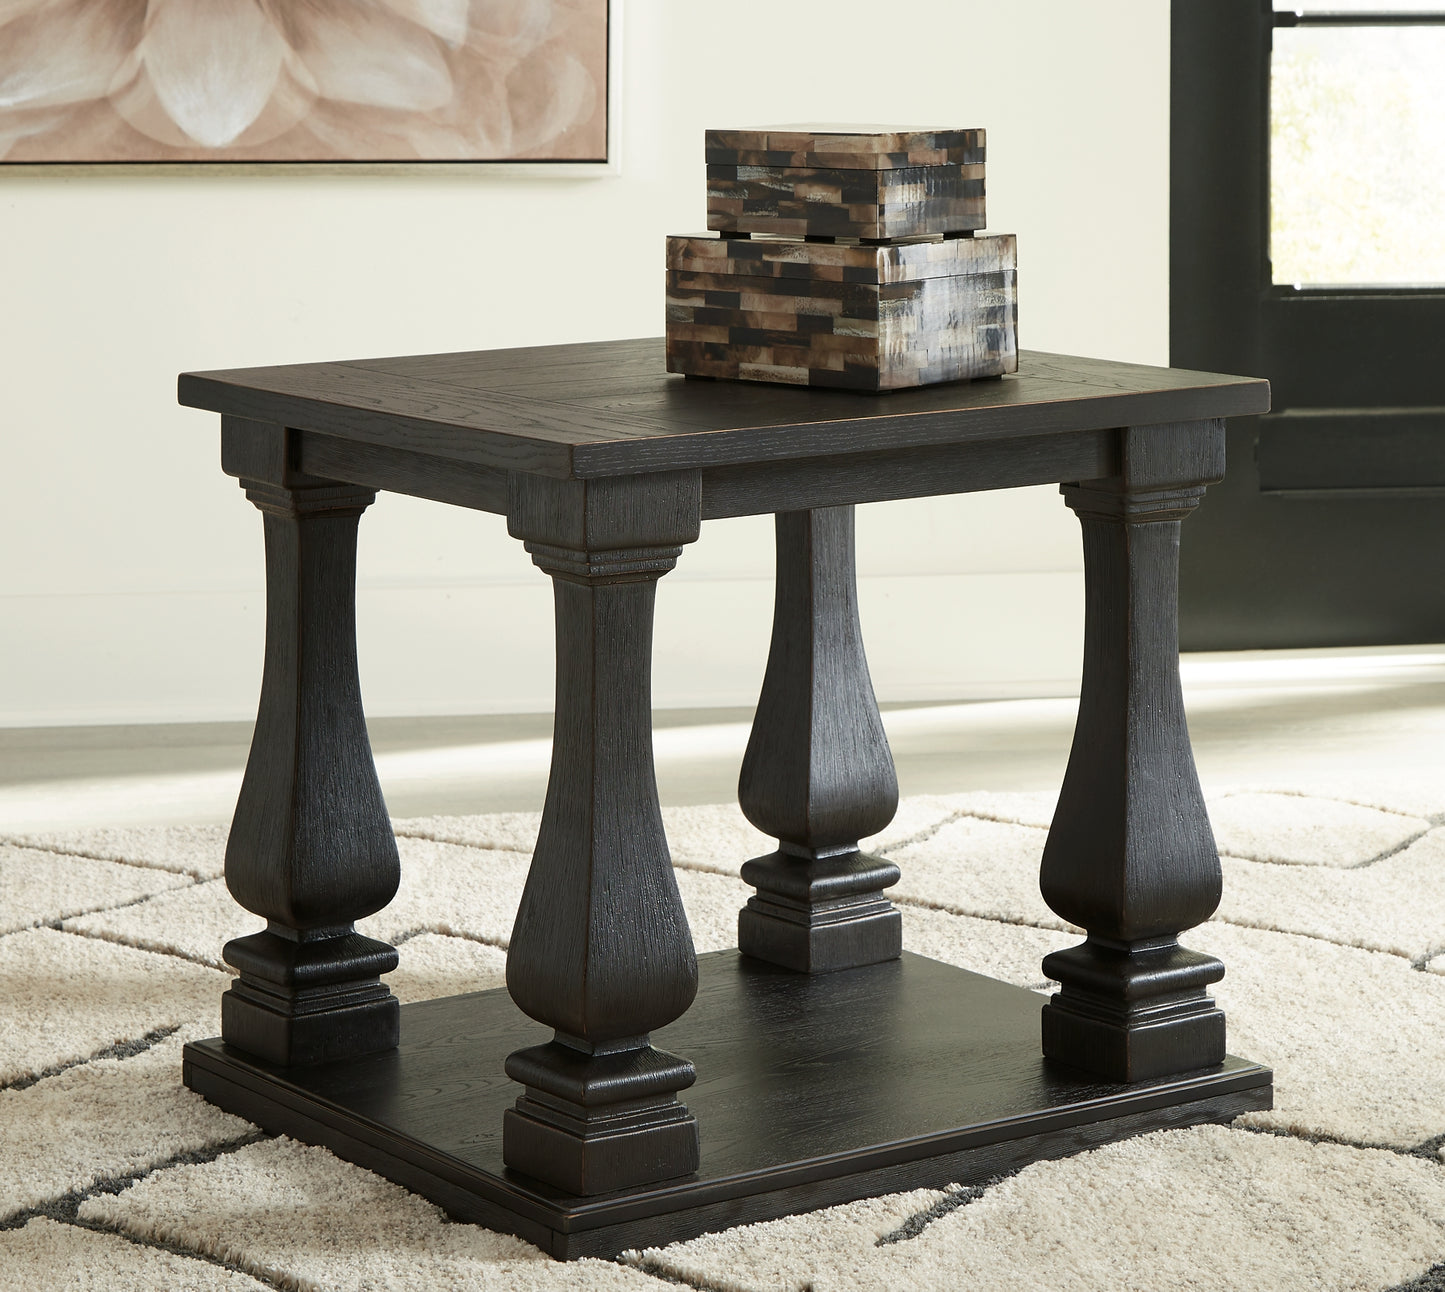 Wellturn Coffee Table with 2 End Tables JB's Furniture  Home Furniture, Home Decor, Furniture Store